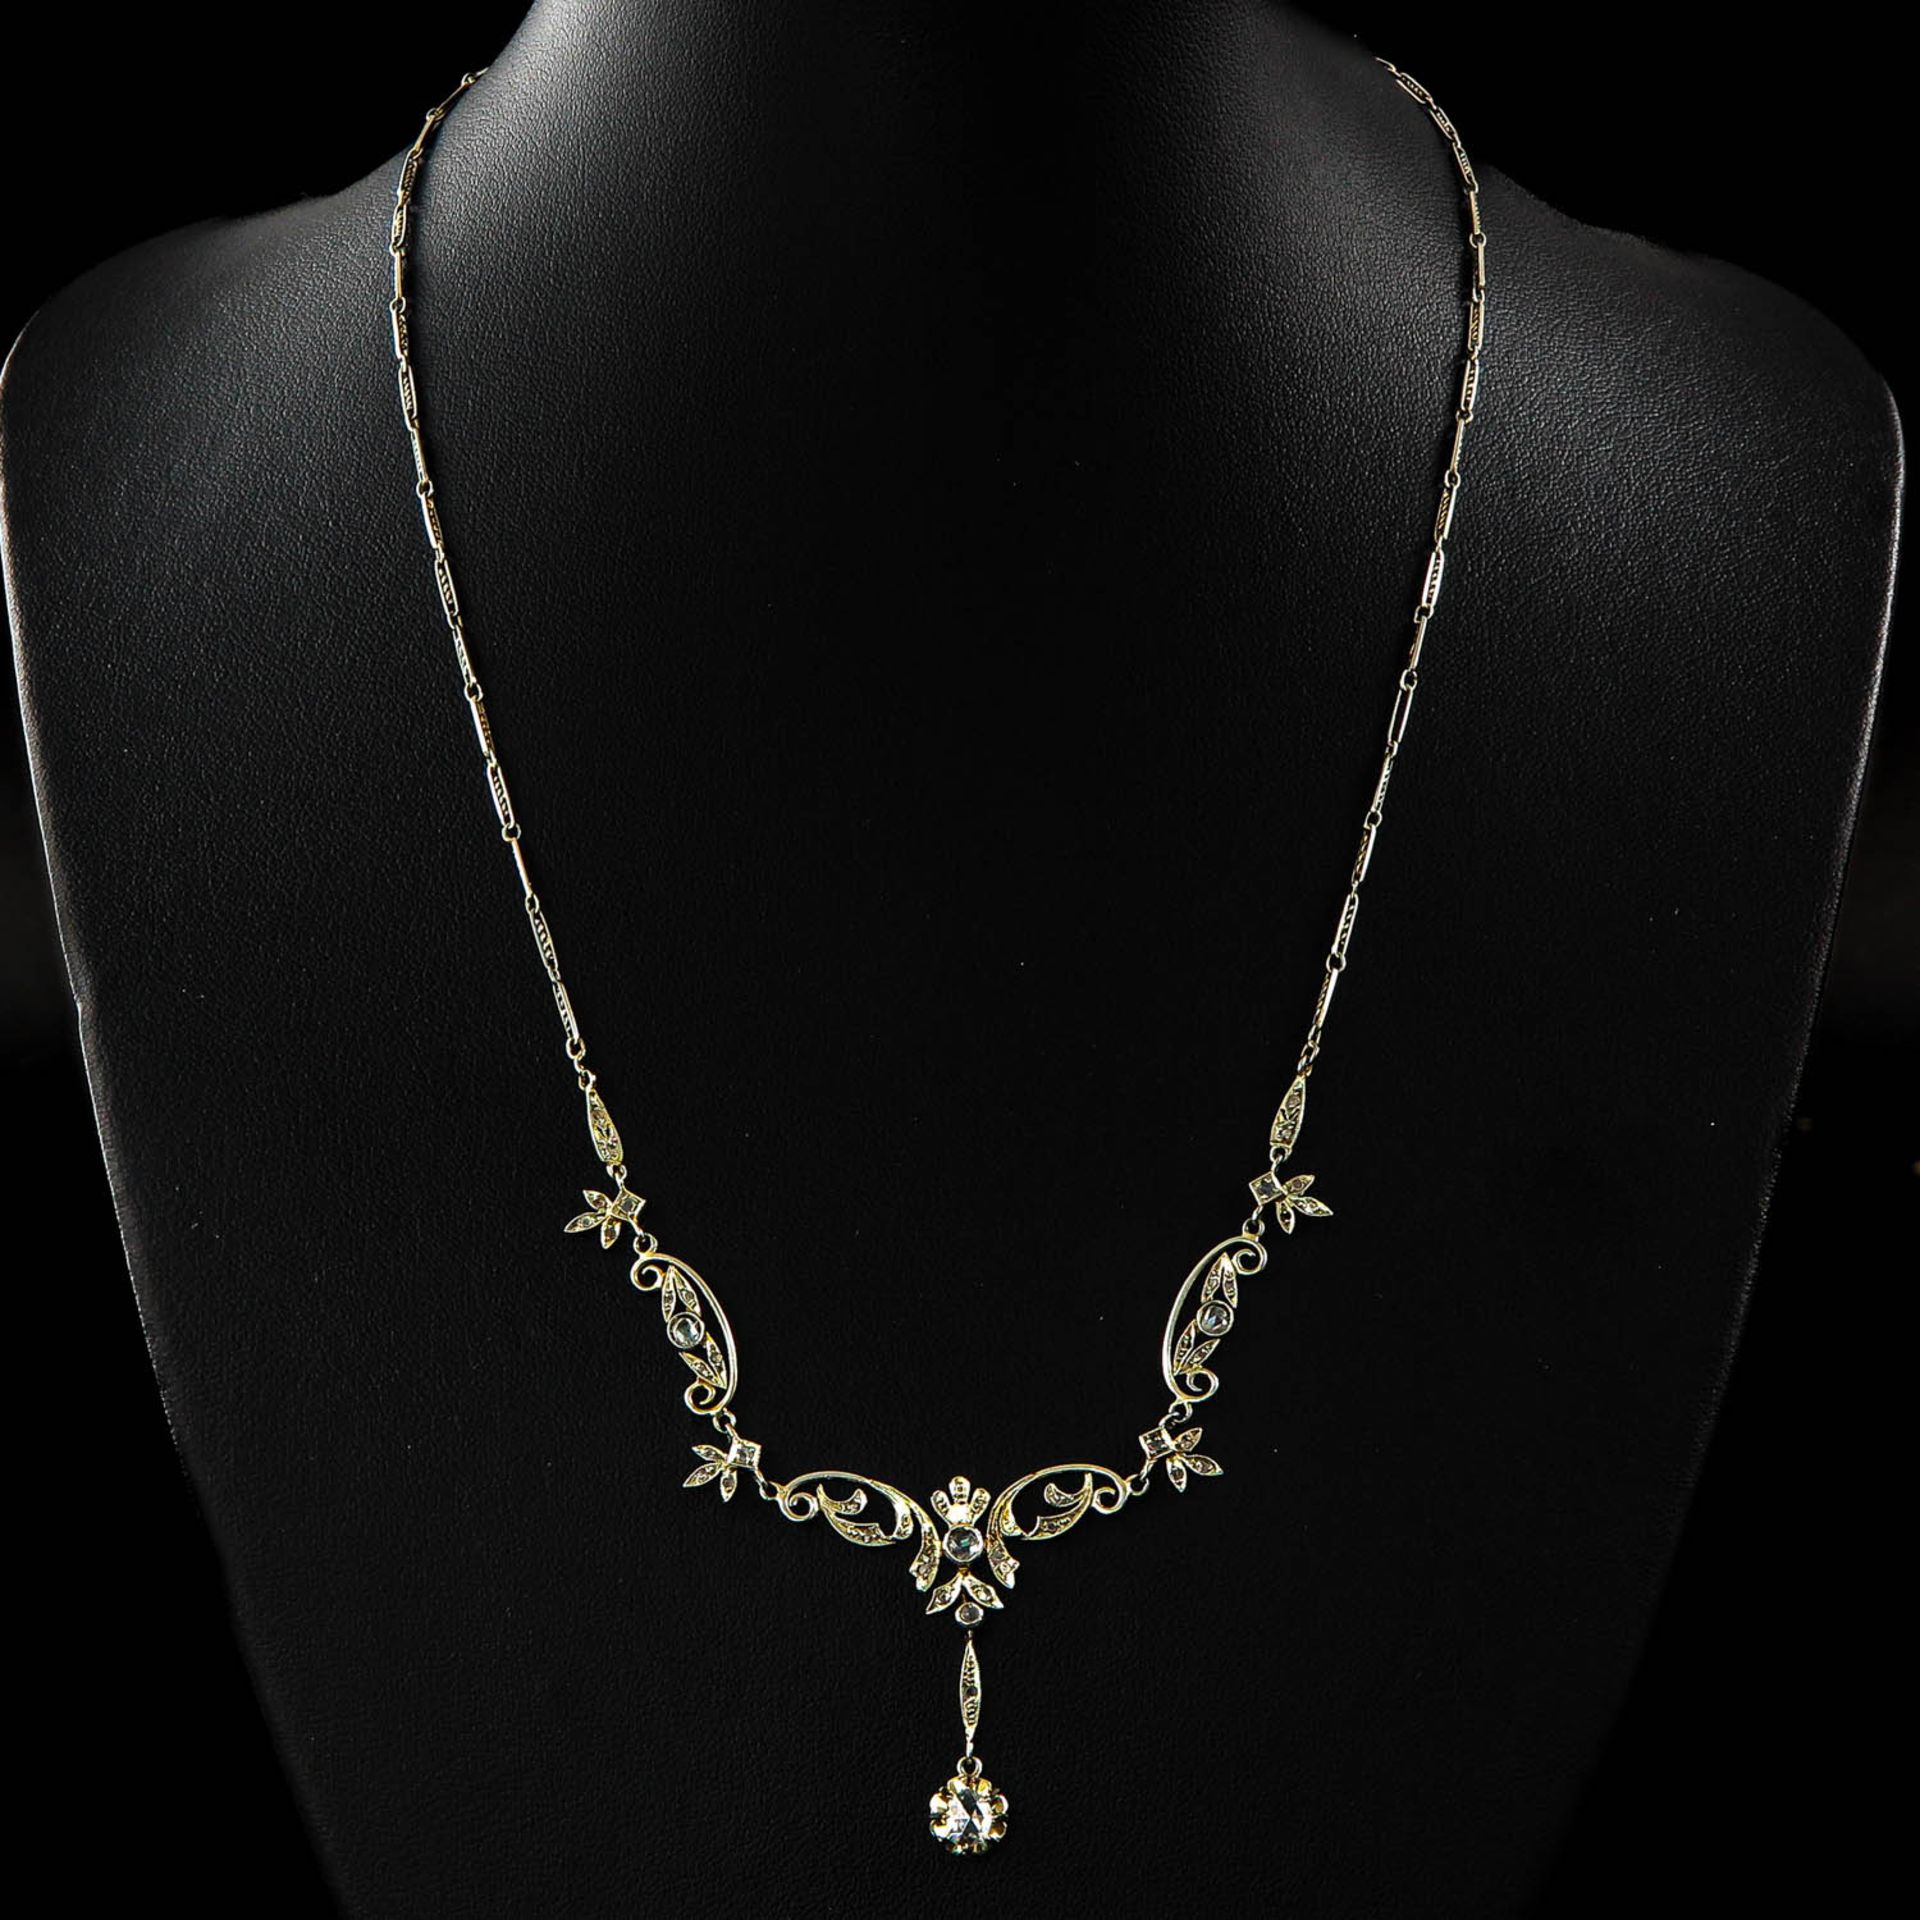 A 10KG Necklace with Rose and Antique Cut Diamonds - Image 2 of 3